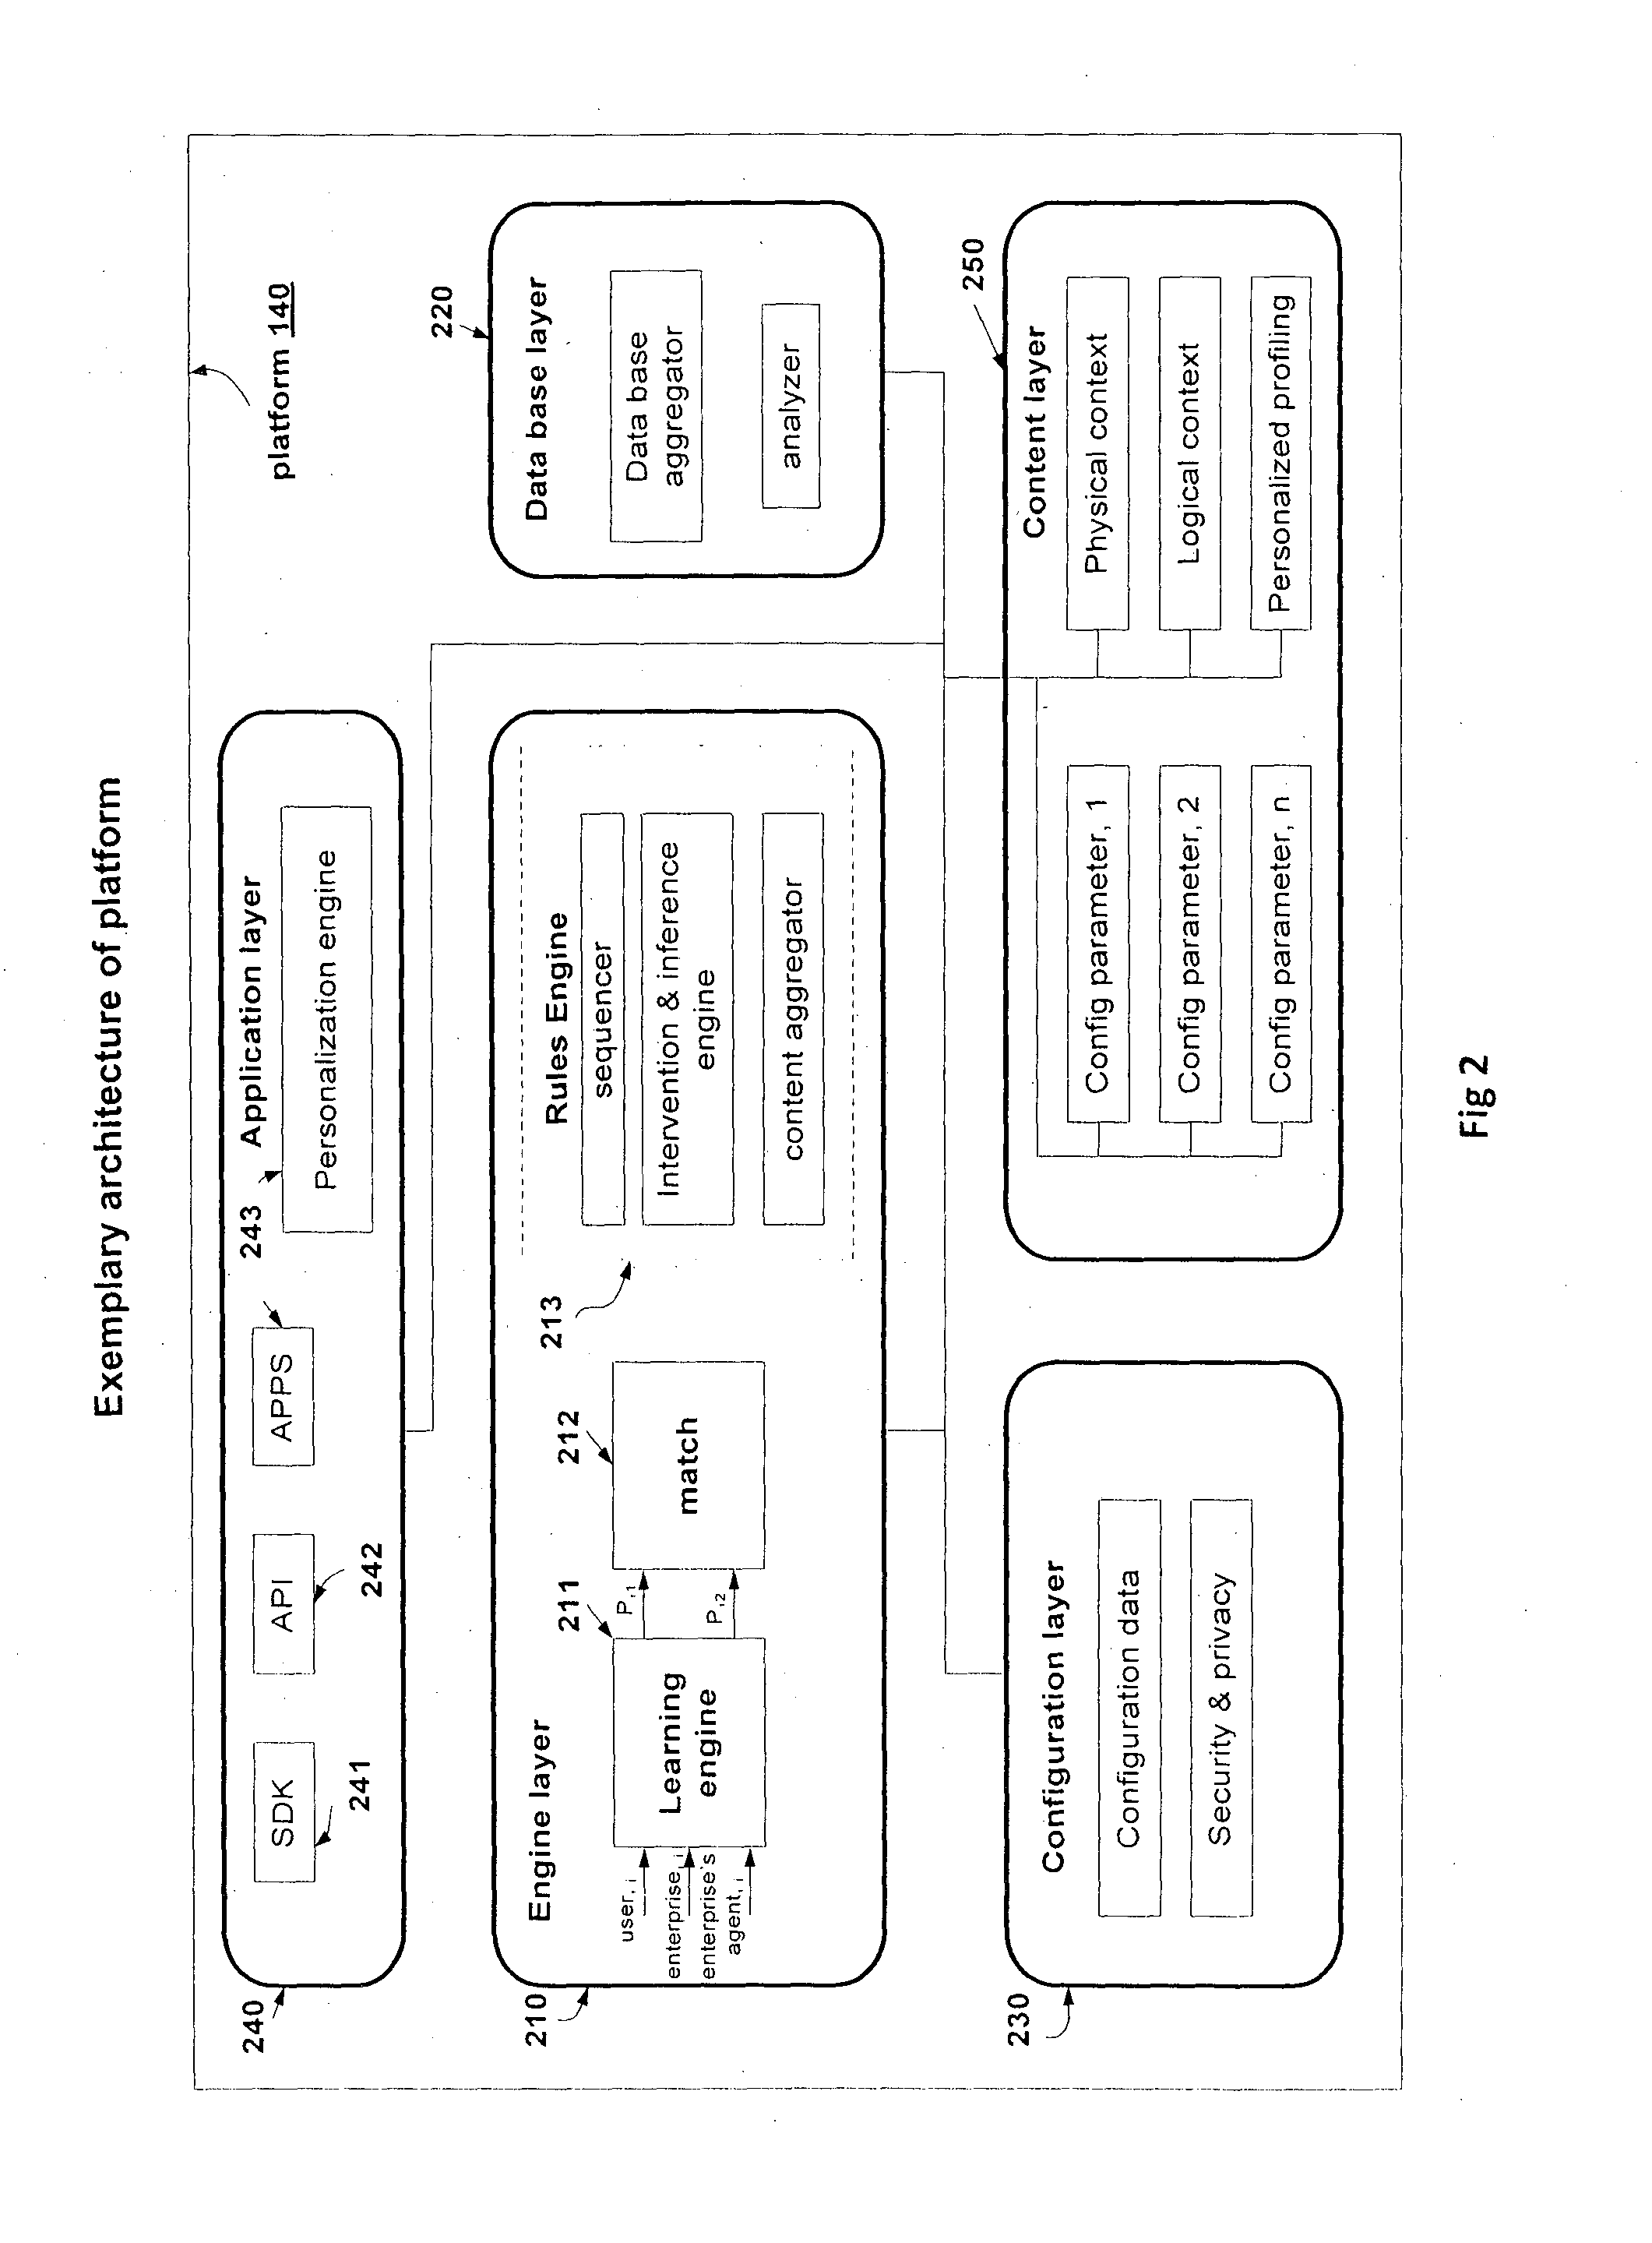 System and method for multi party characteristics and requirements matching and timing synchronization